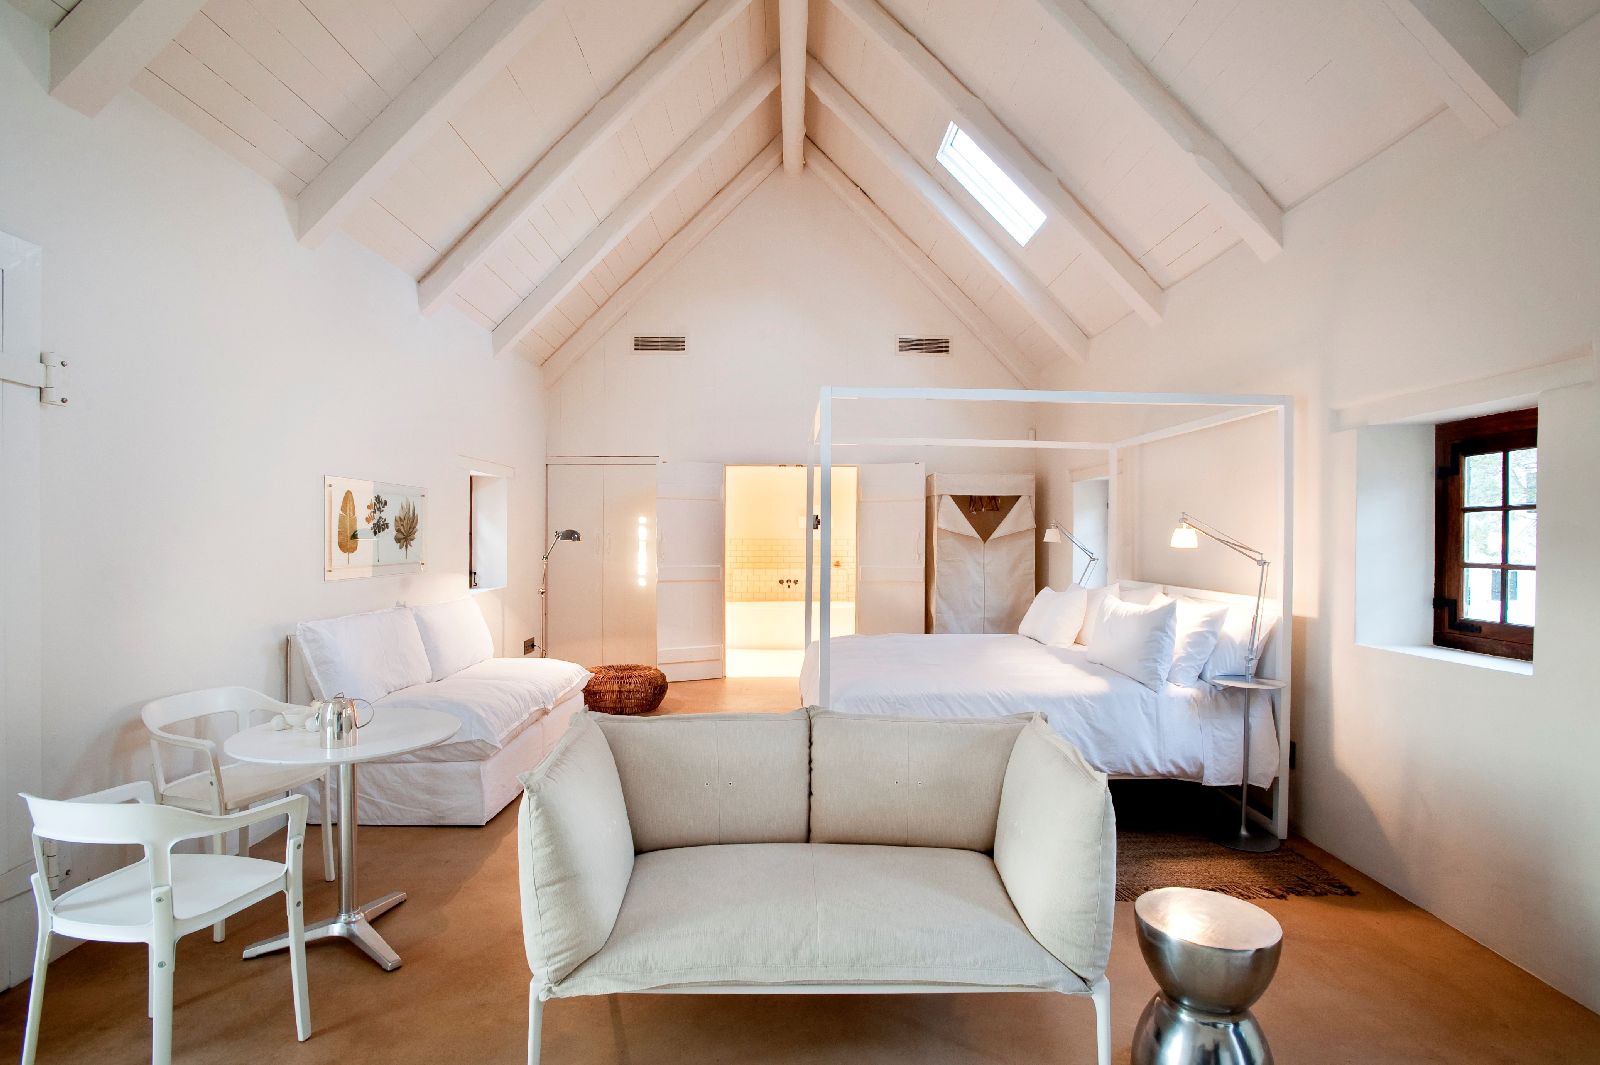 Interiors of a guest studio at Babylonstoren in South Africa